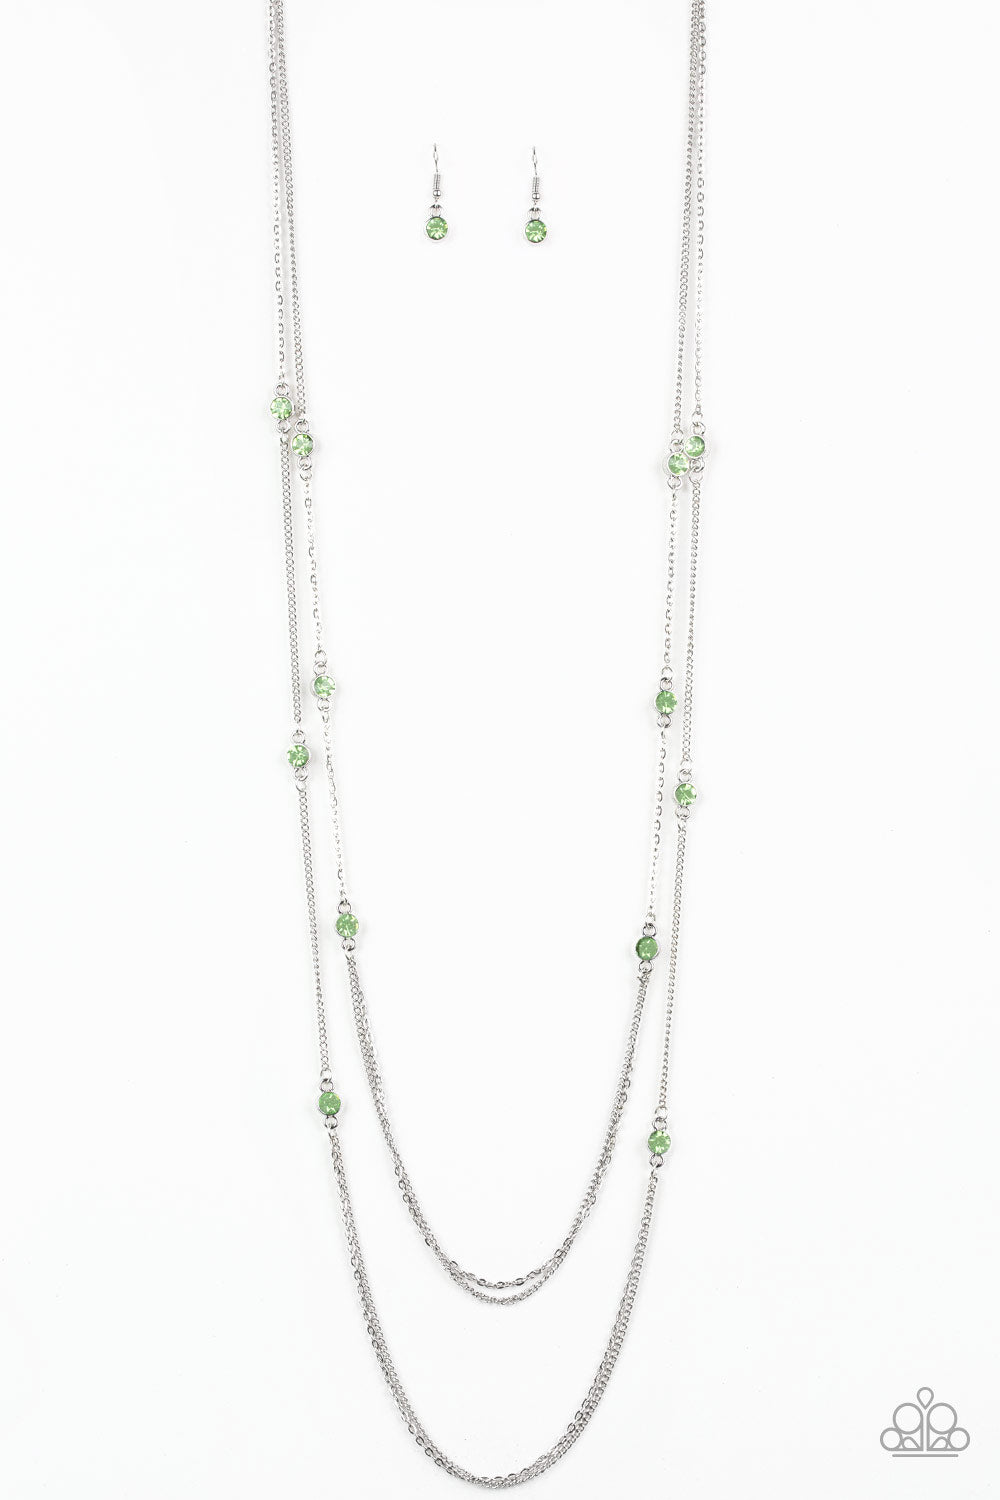 Sparkle of the Day - green - Paparazzi necklace